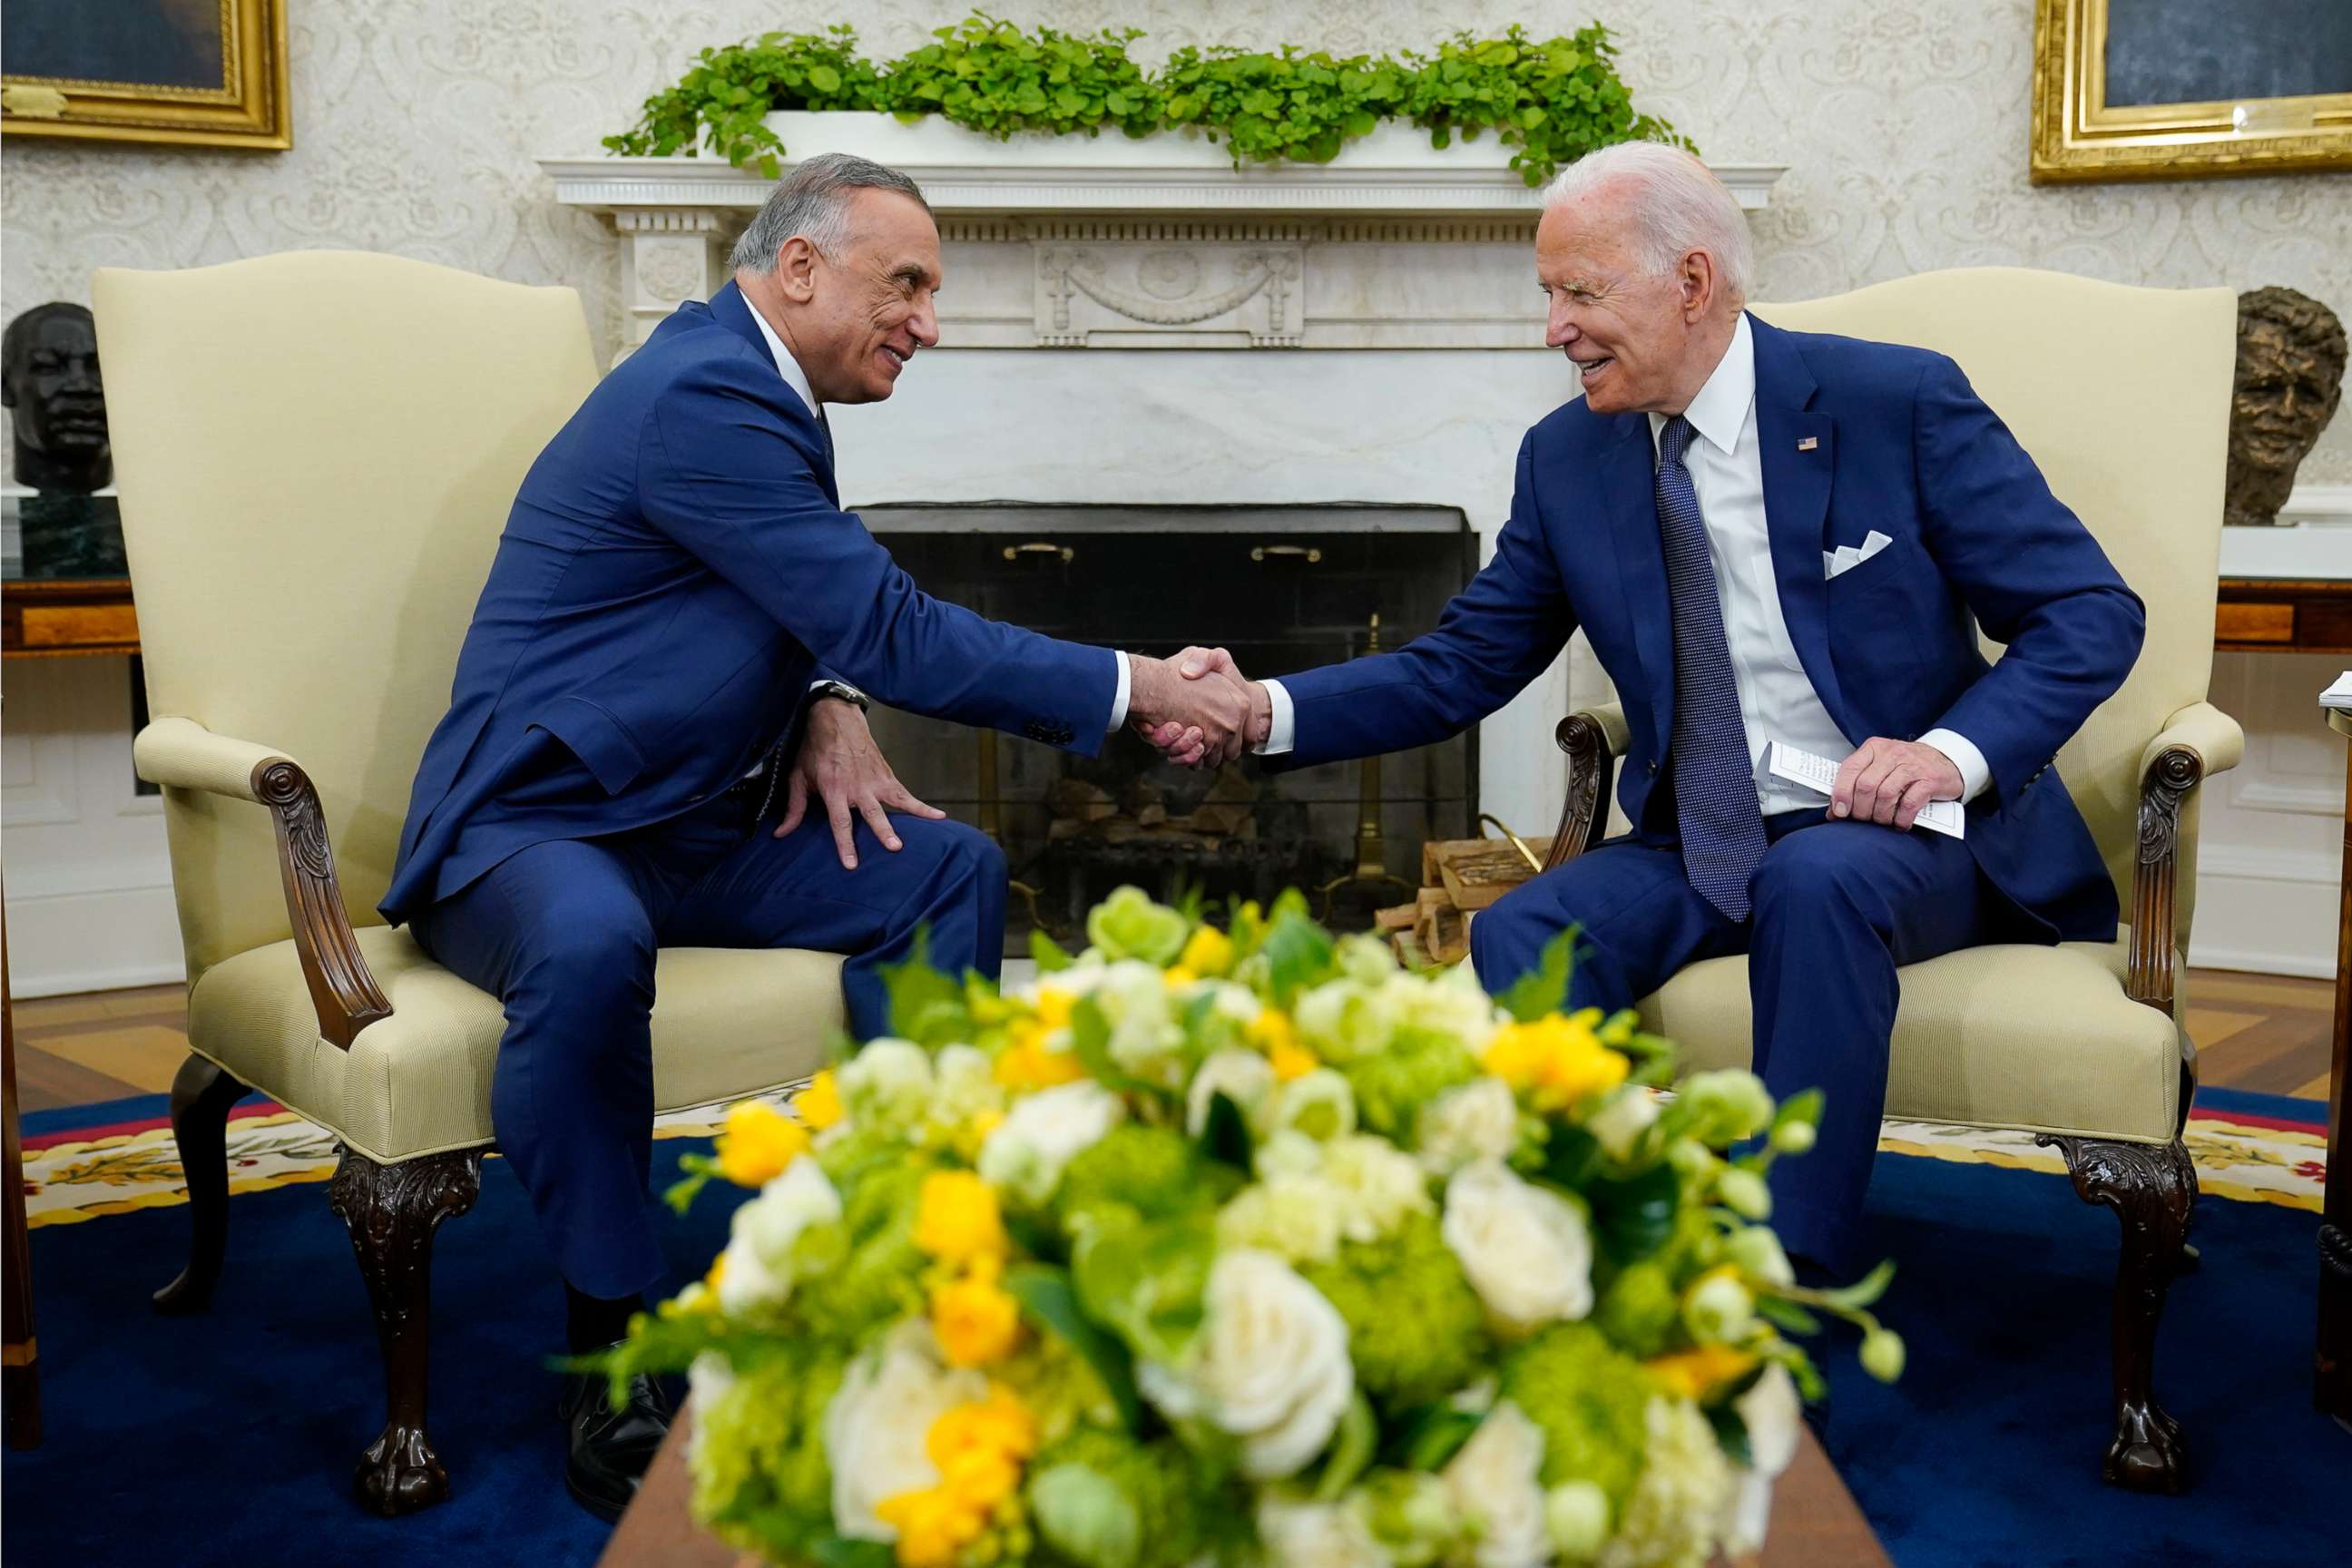 PHOTO: President Joe Biden, right, shakes hands with Iraqi Prime Minister Mustafa al-Kadhimi, left, during their meeting in the Oval Office of the White House, July 26, 2021. 